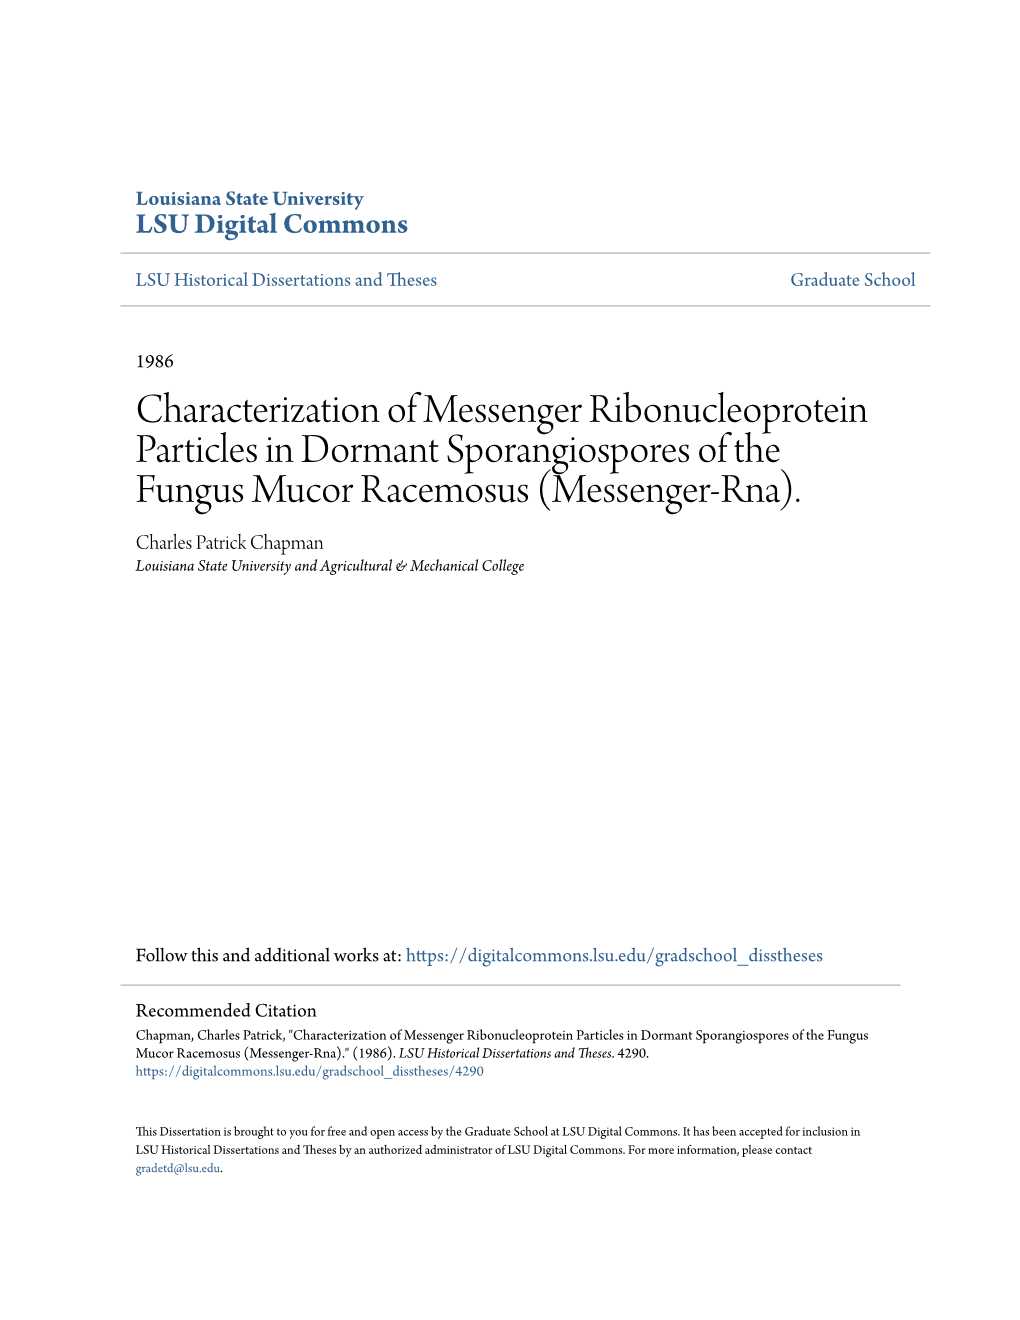 Characterization of Messenger Ribonucleoprotein Particles in Dormant Sporangiospores of the Fungus Mucor Racemosus (Messenger-Rna)